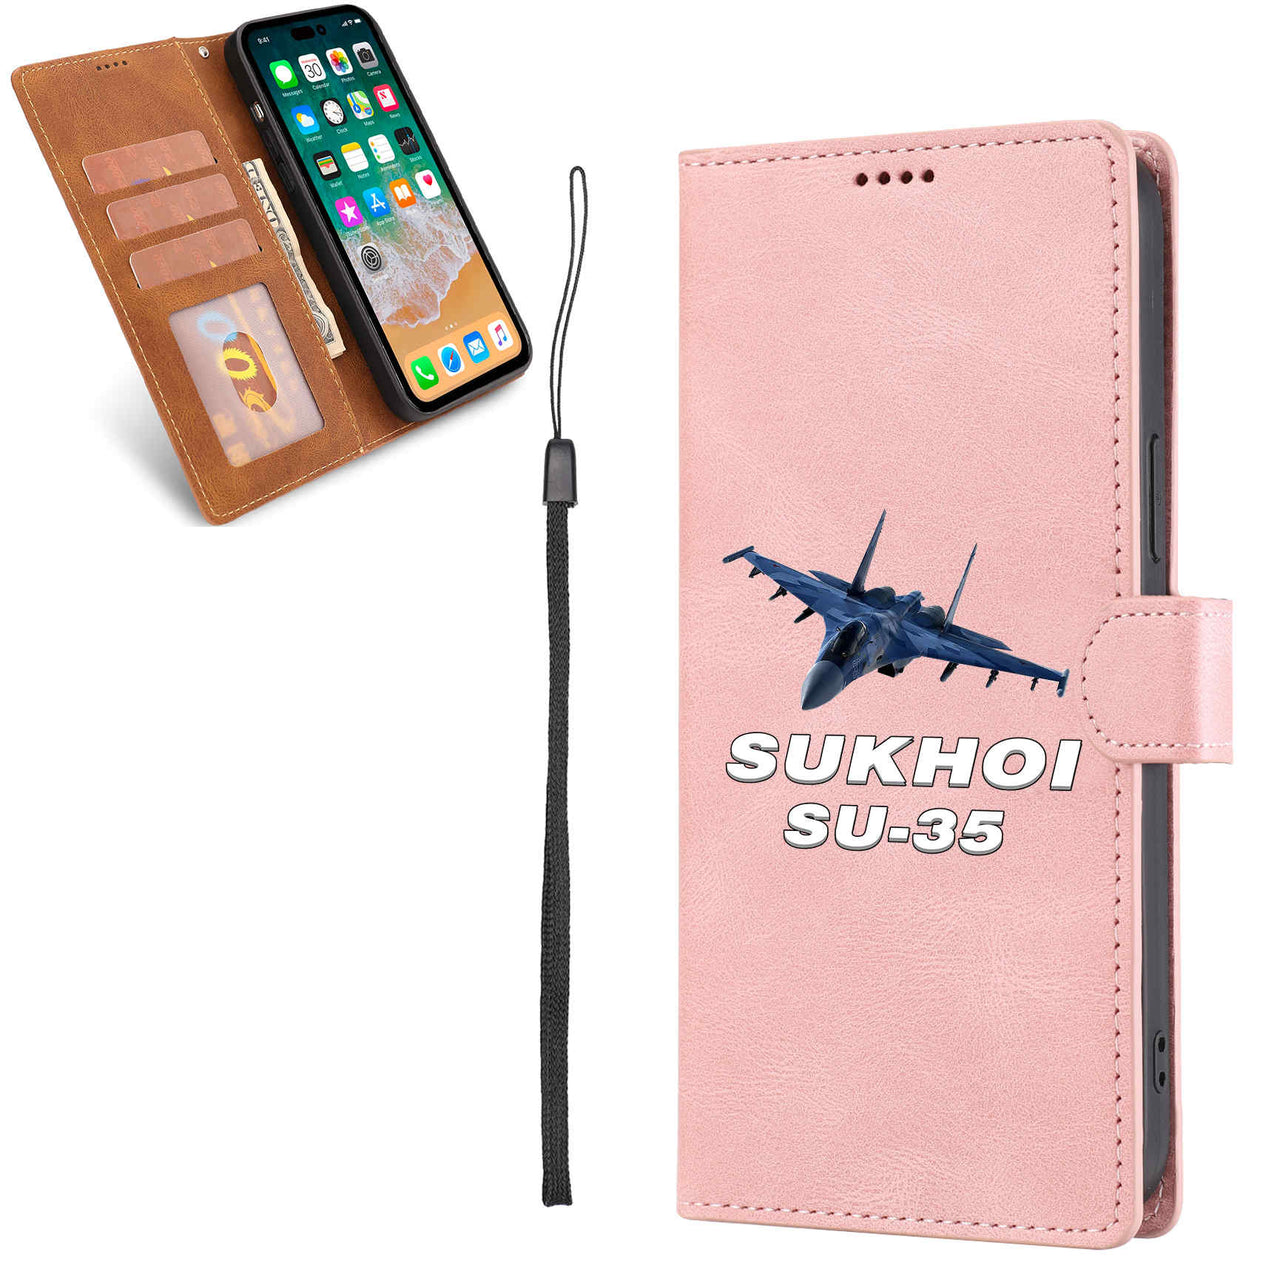 The Sukhoi SU-35 Leather Samsung A Cases